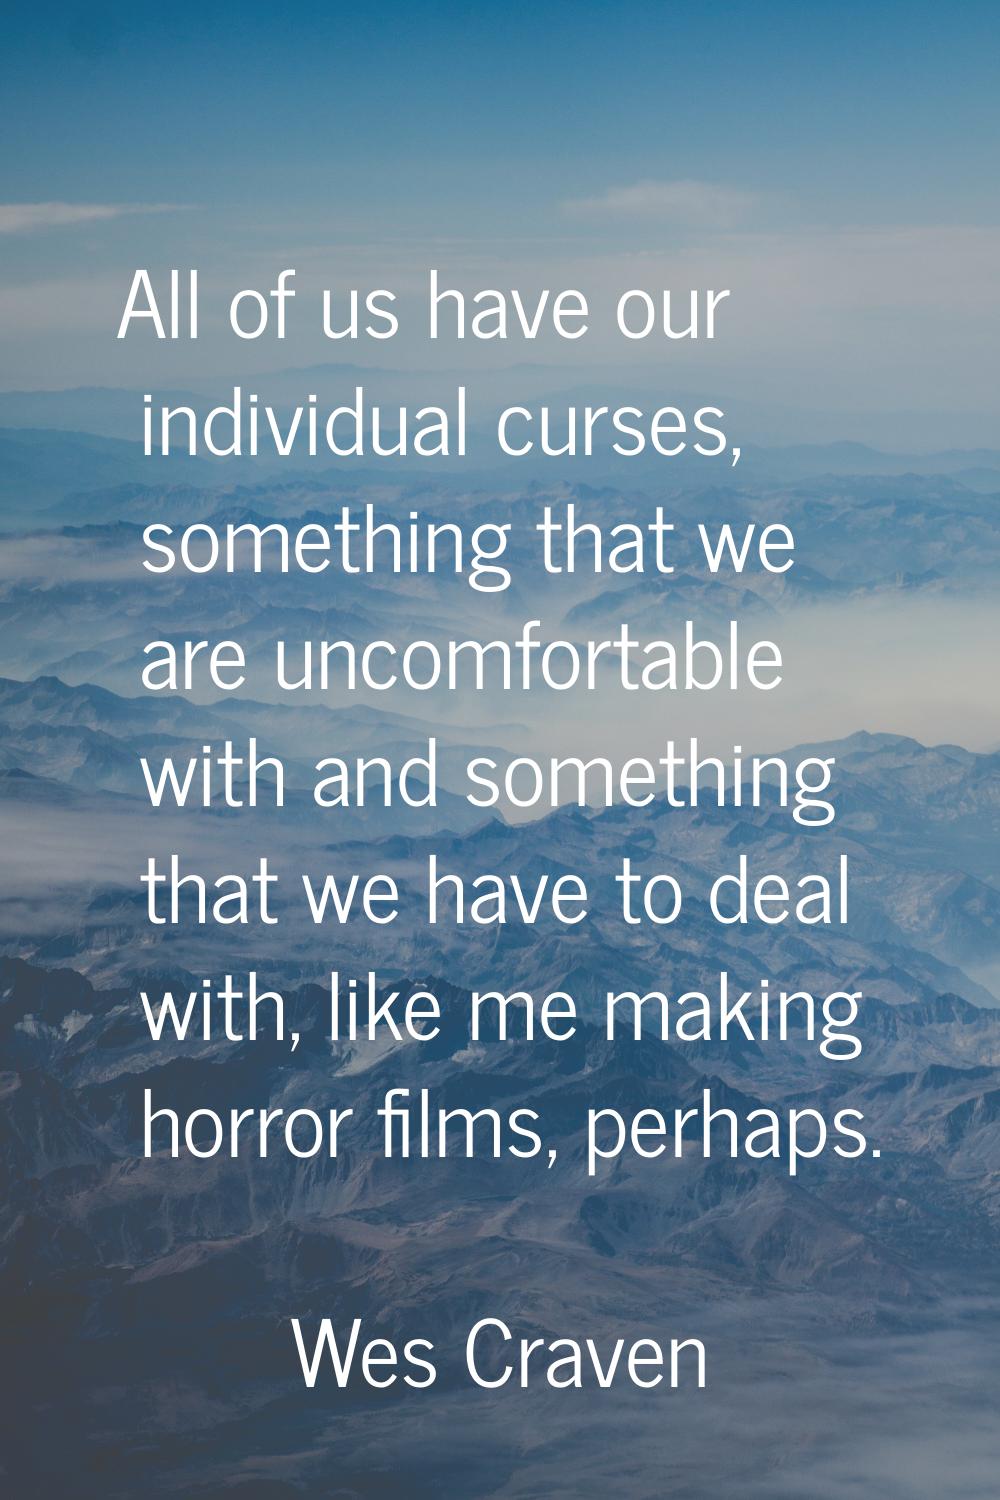 All of us have our individual curses, something that we are uncomfortable with and something that w